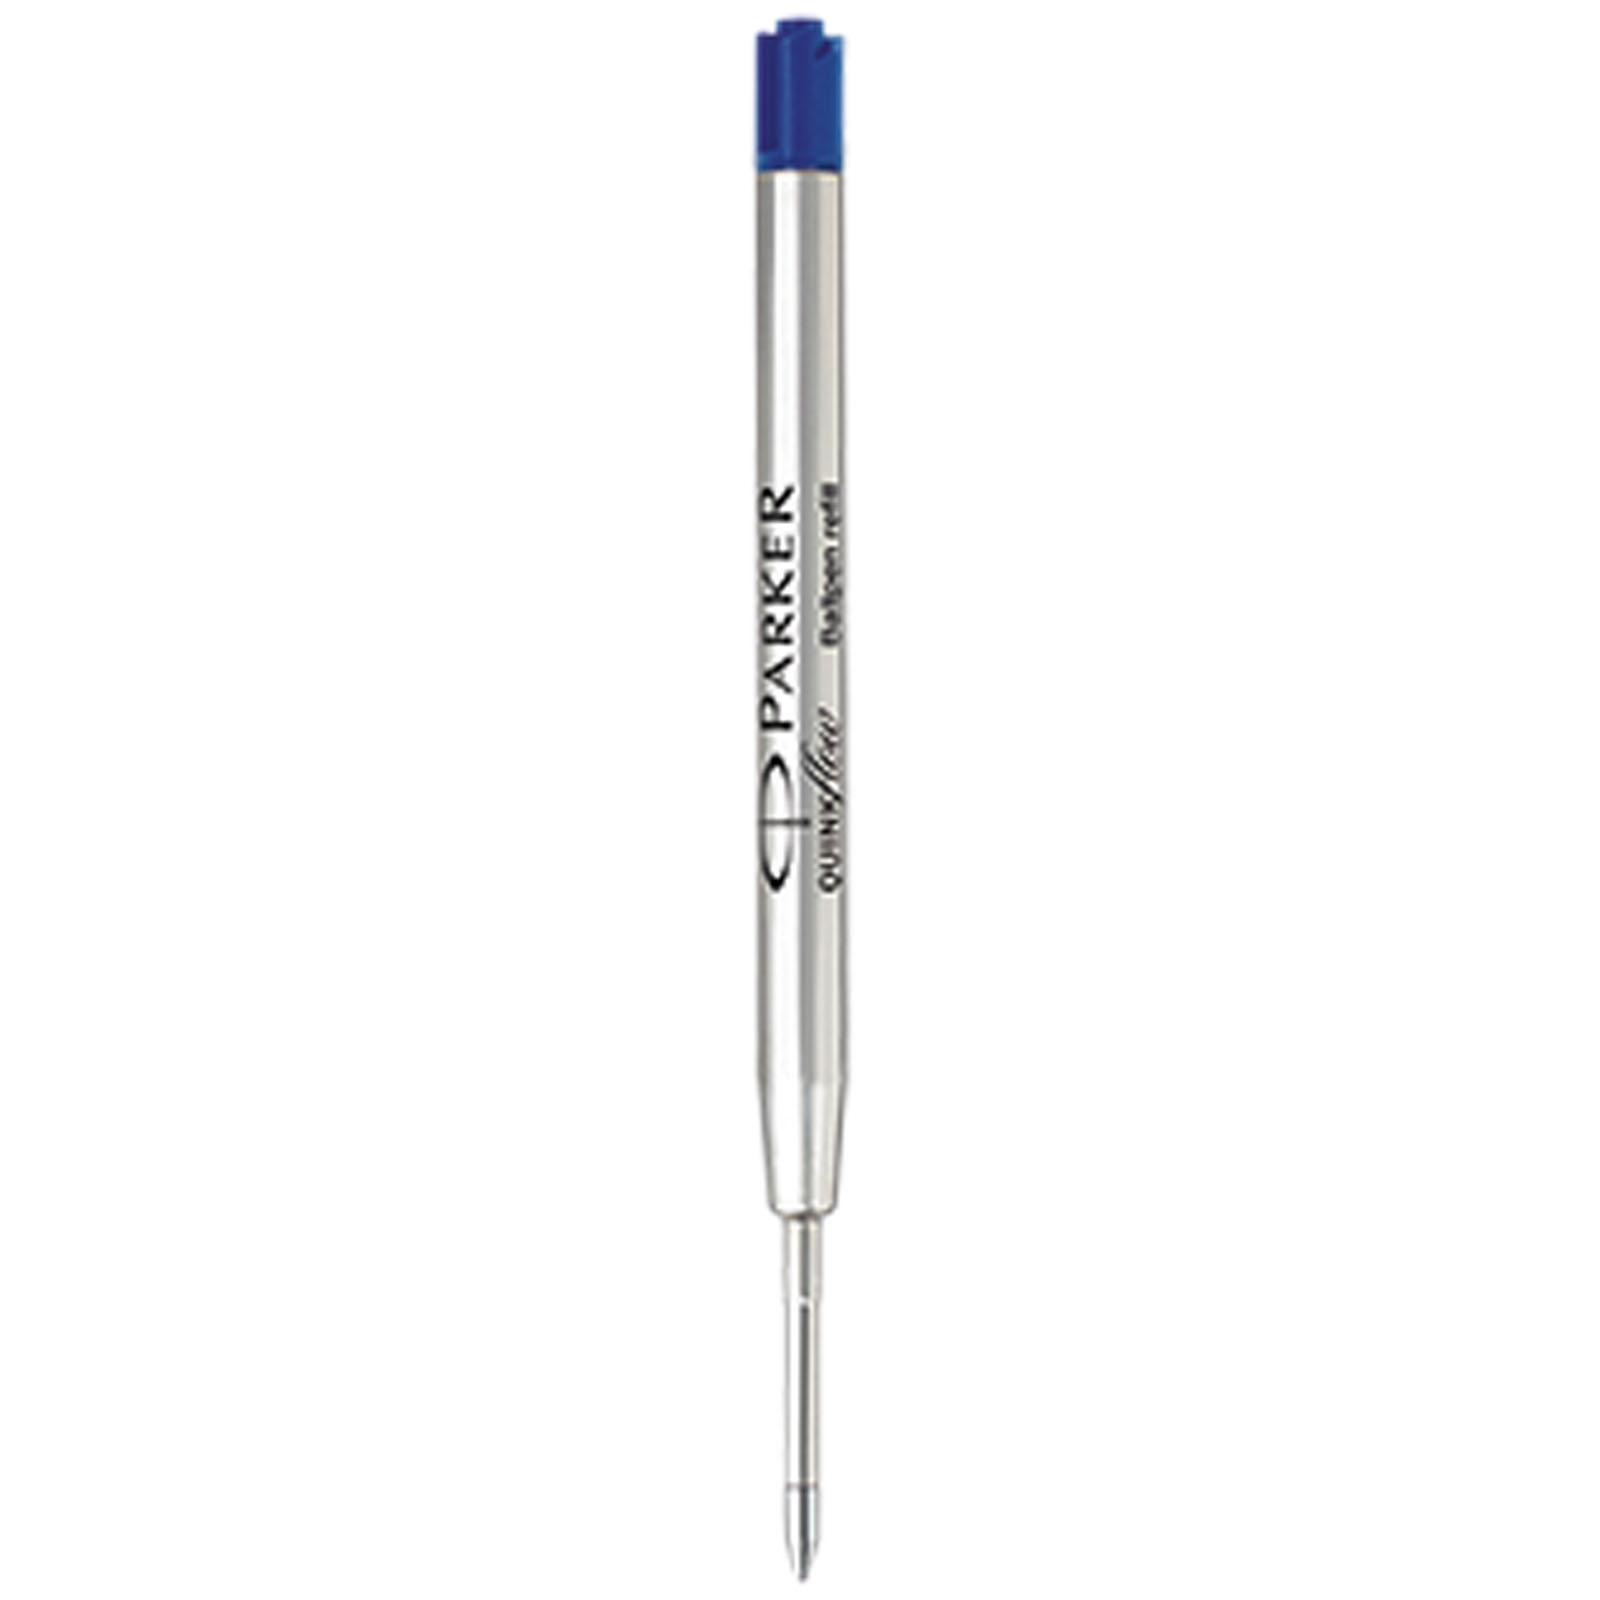 Advertising Other Pens & Writing Accessories - Parker Quinkflow ballpoint pen refill - 1